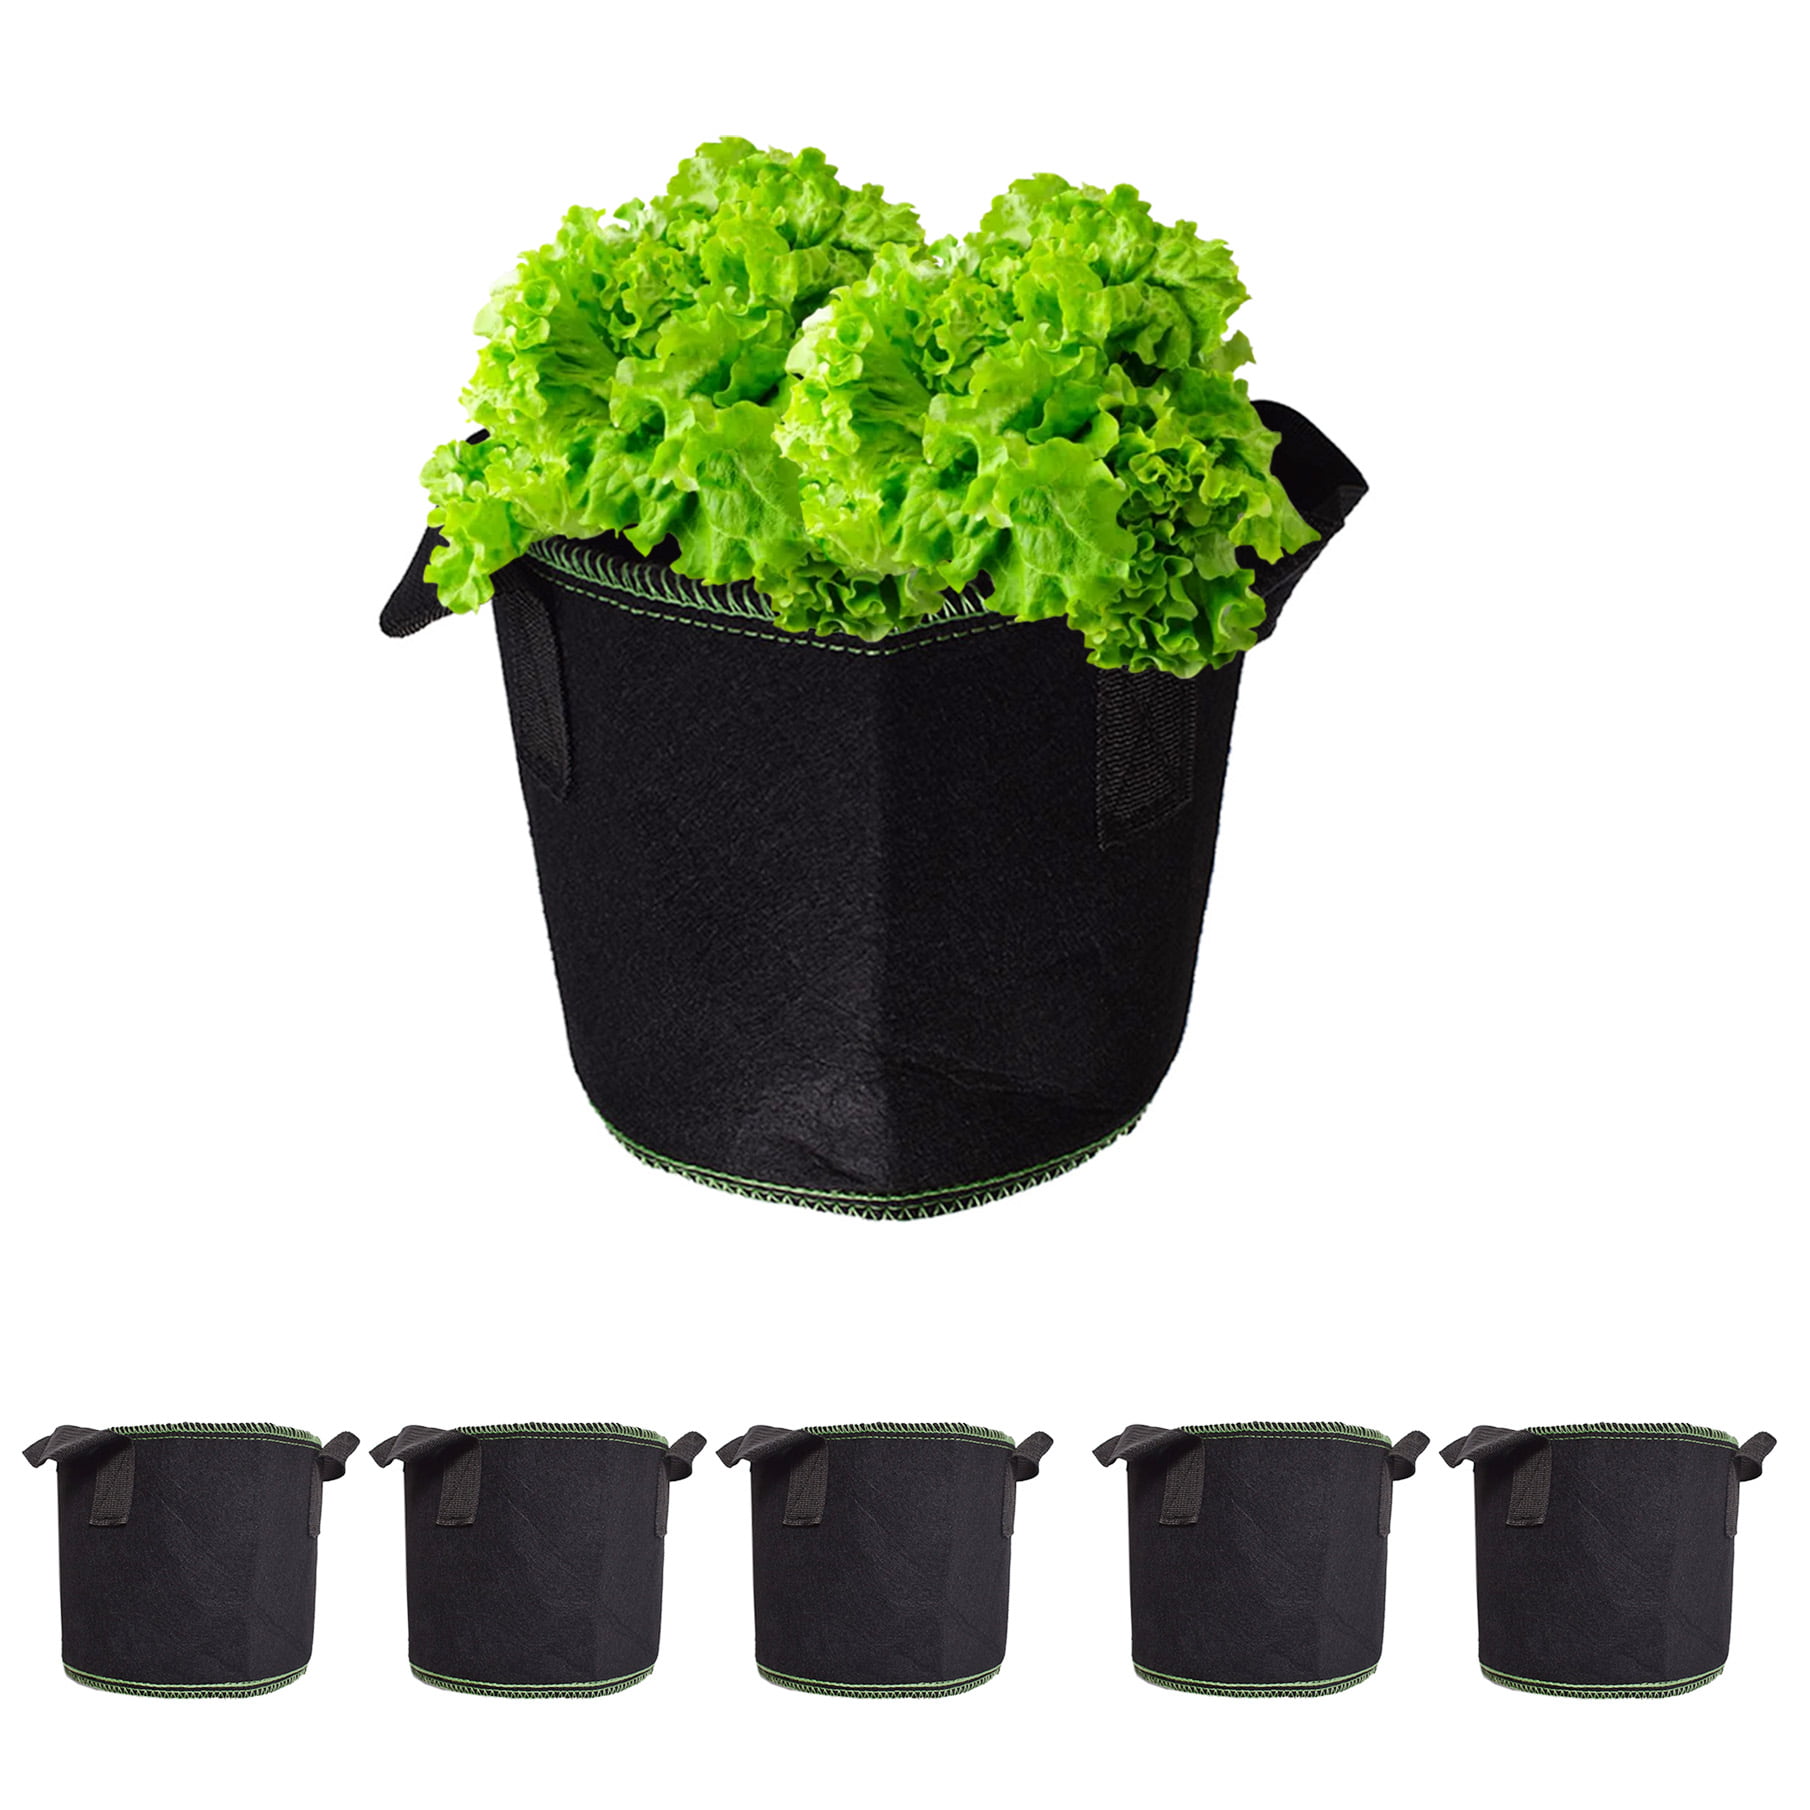 Grow Bag Garden Heavy Duty 400G Thick Fabric Container for Potato Plant Growing